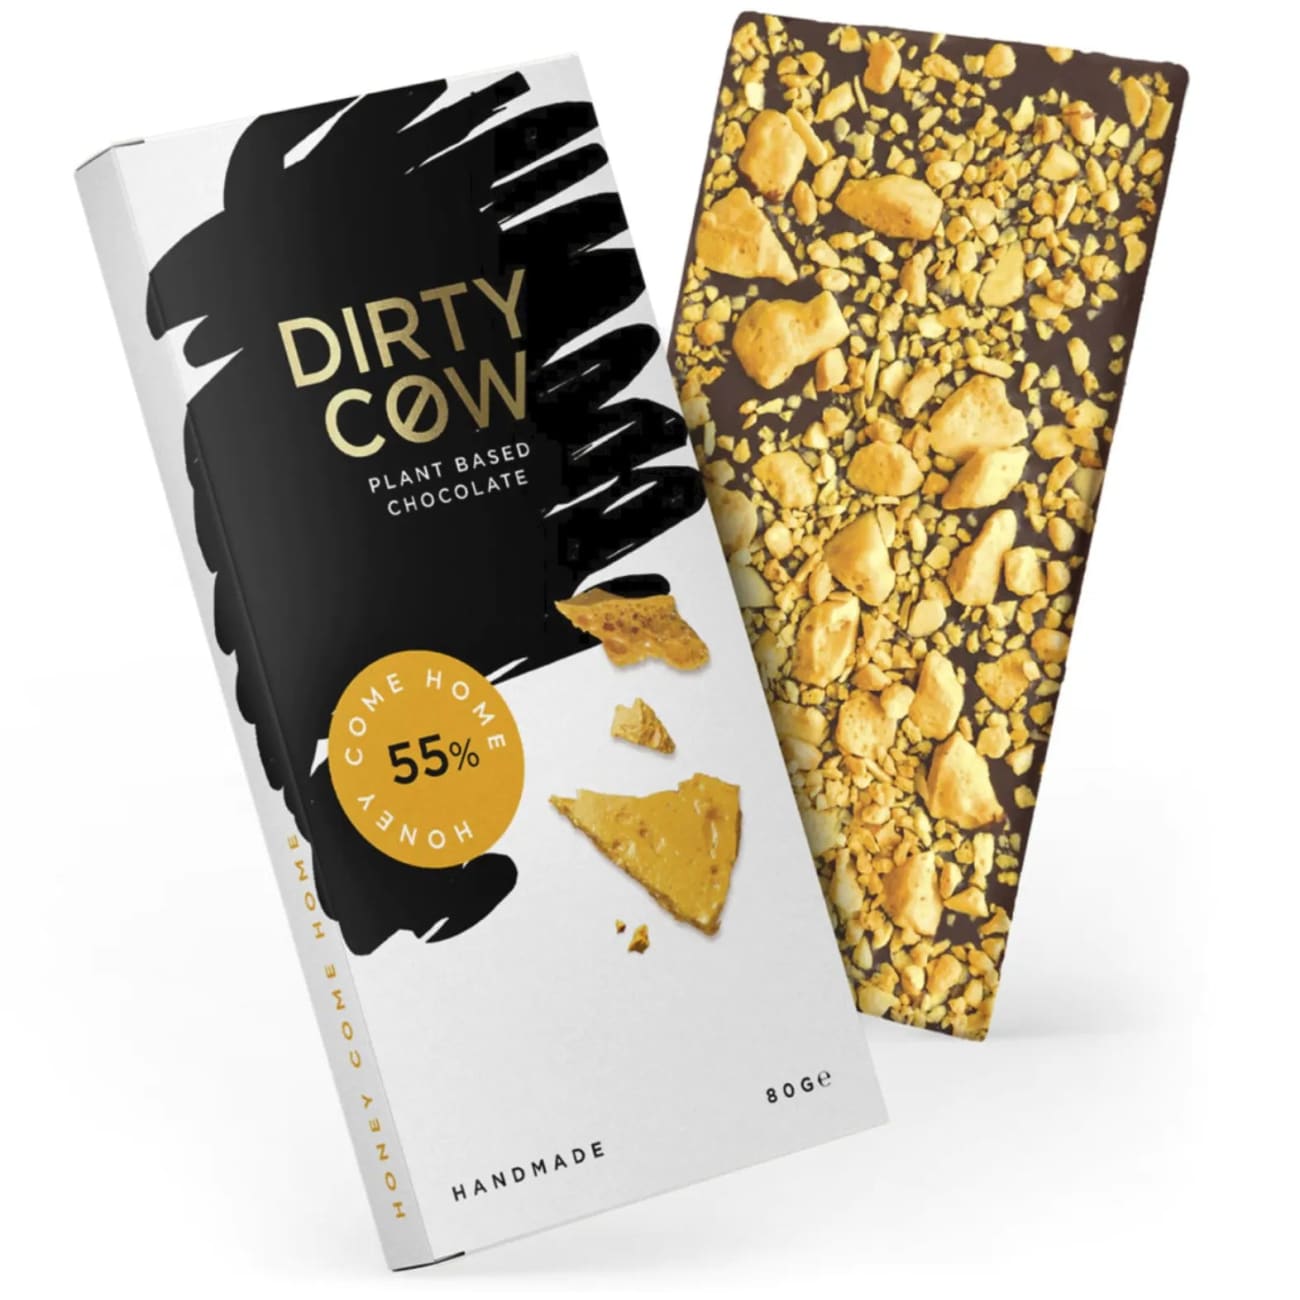 Dirty Cow HONEY COME HOME Plant Based - chocolate Brand